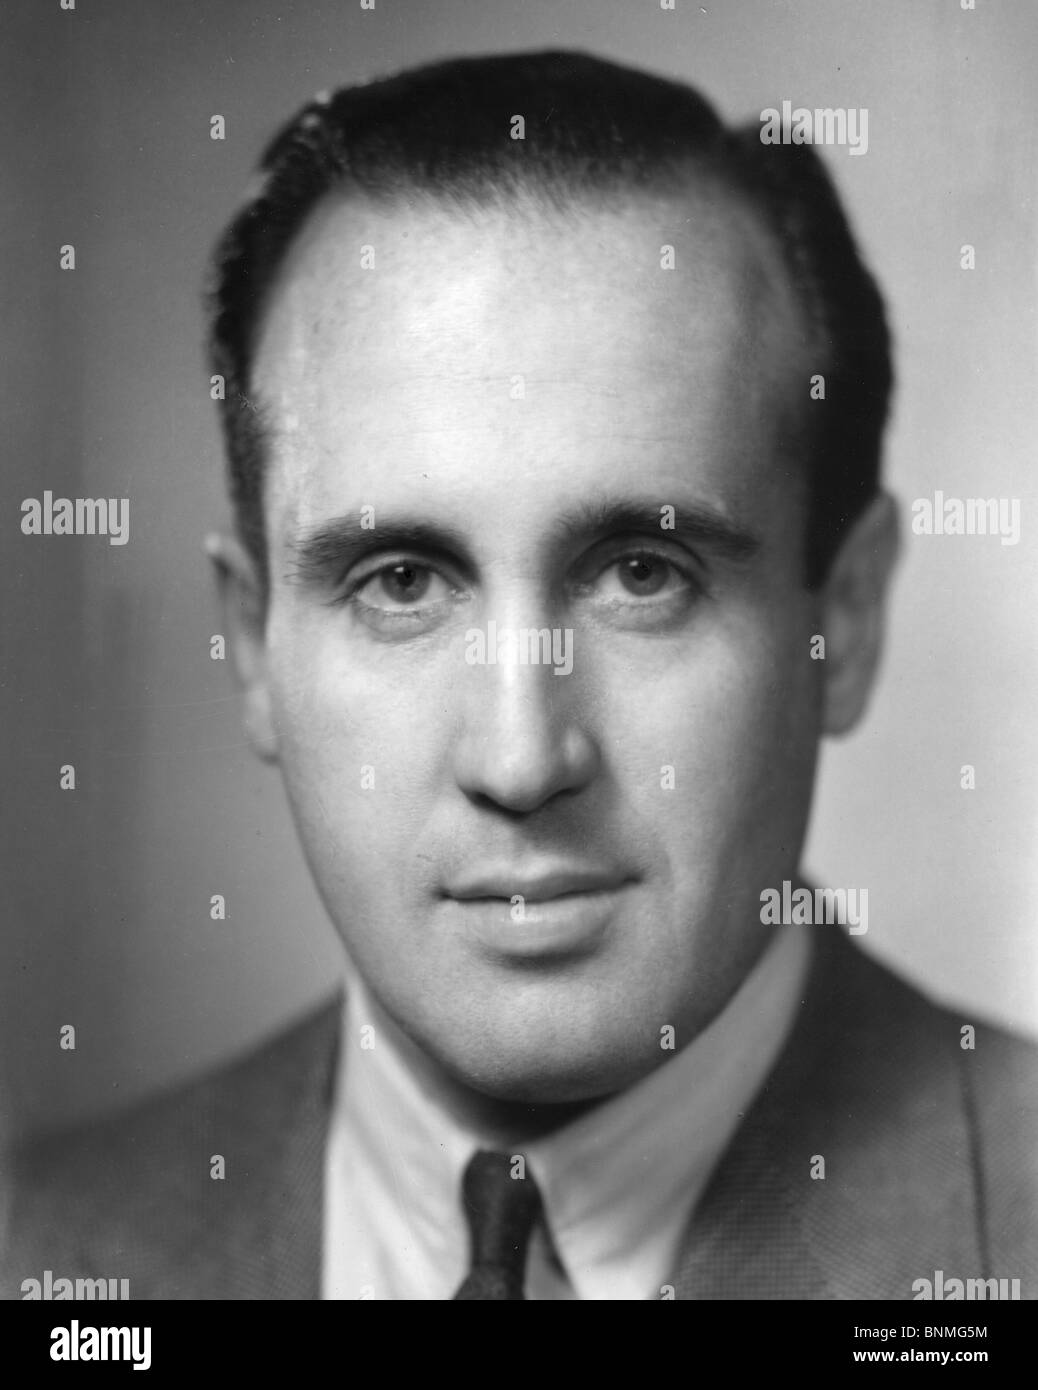 H J HEINZ (1908-87) American CEO of the H J Heinz food company here in 1948 Stock Photo